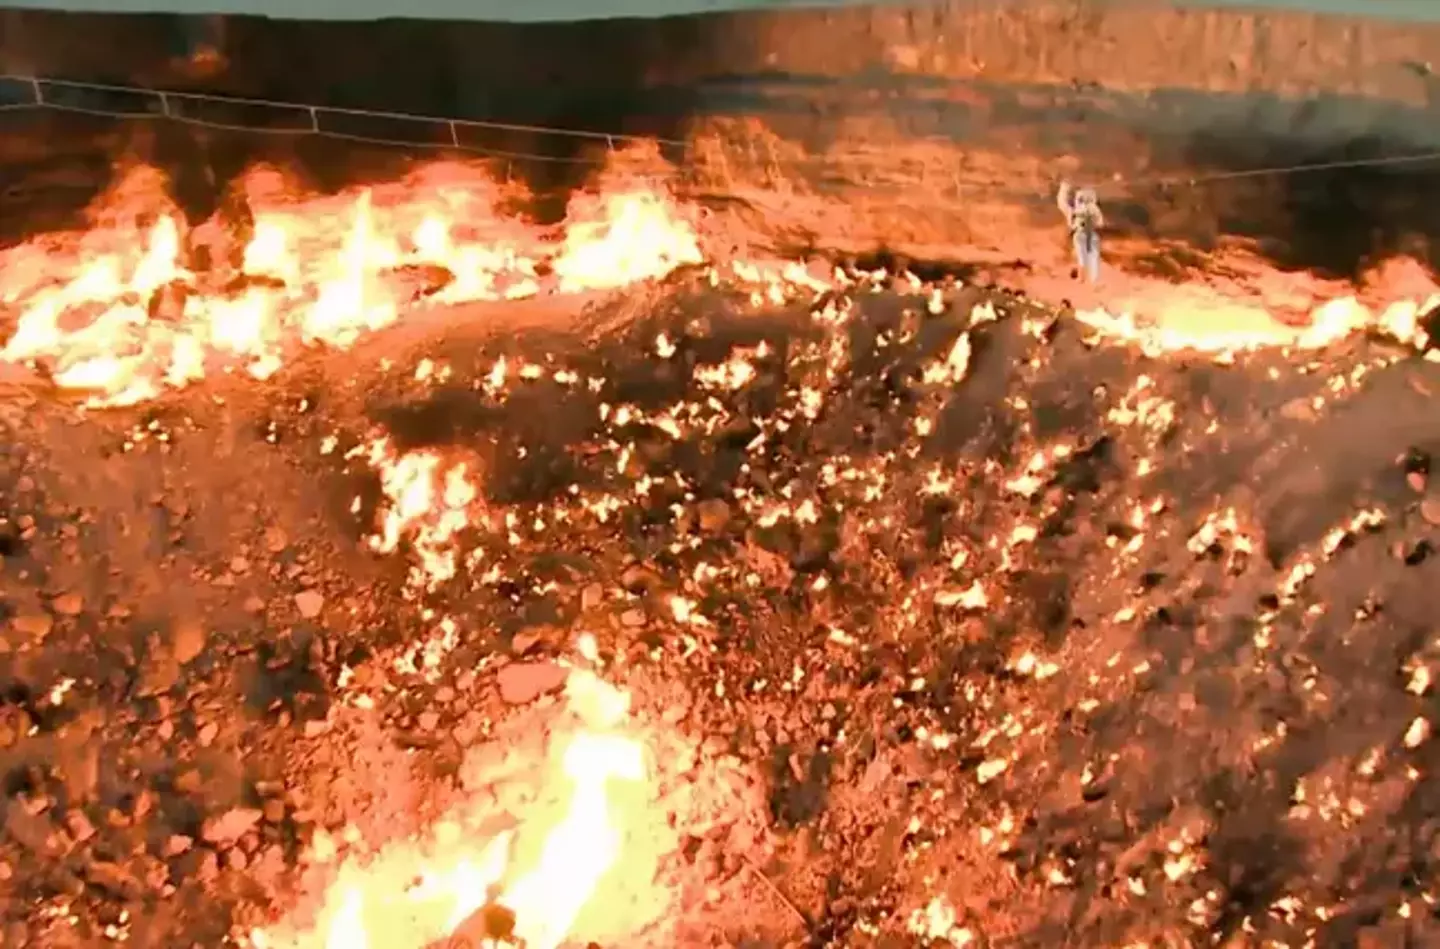 Other eternal flames around the world include the 'Door to Hell', a crater burning atop a natural gas deposit which has been burning ever since people set it on fire decades ago.